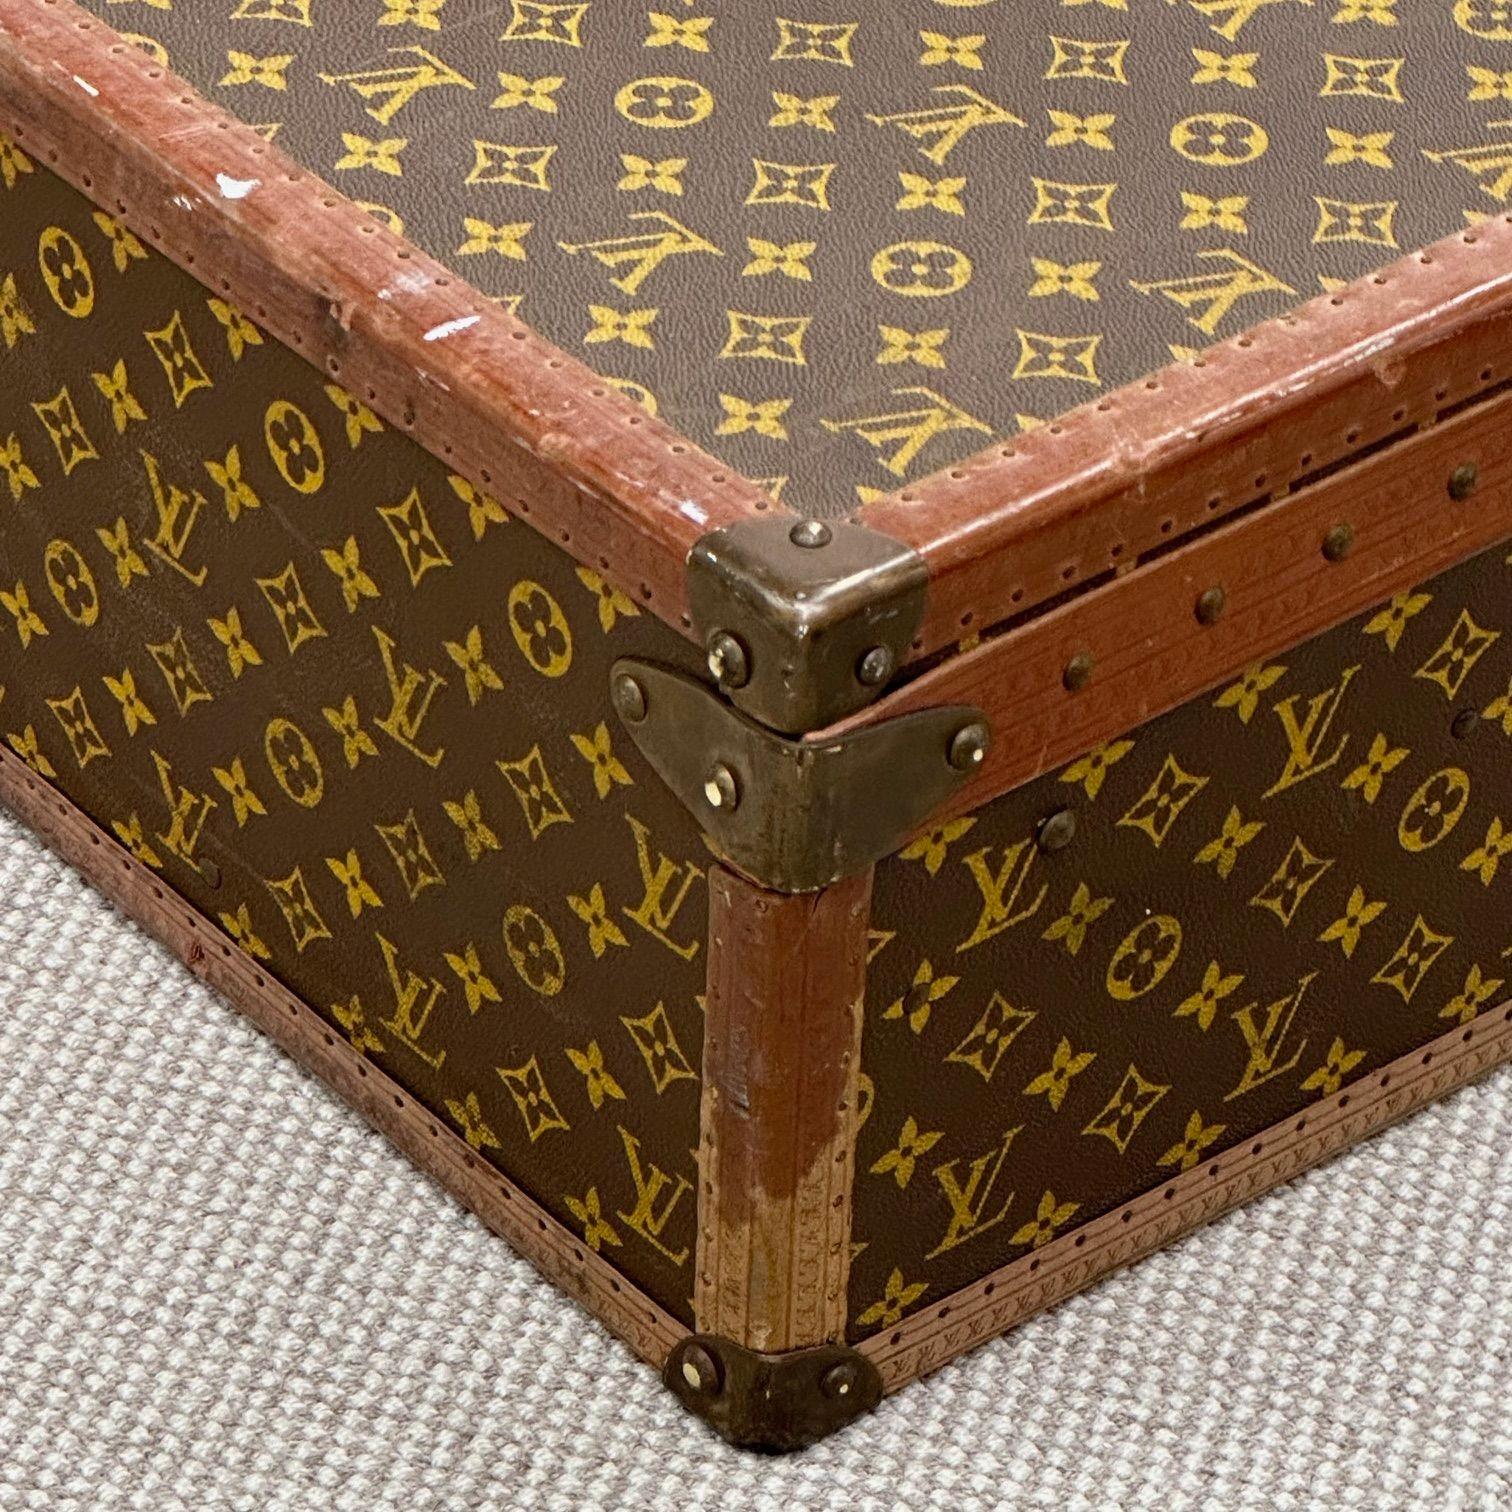 Louis Vuitton Monogram Suitcase / Luggage or Trunk, Alzer 80, Mid 20th Century For Sale 3